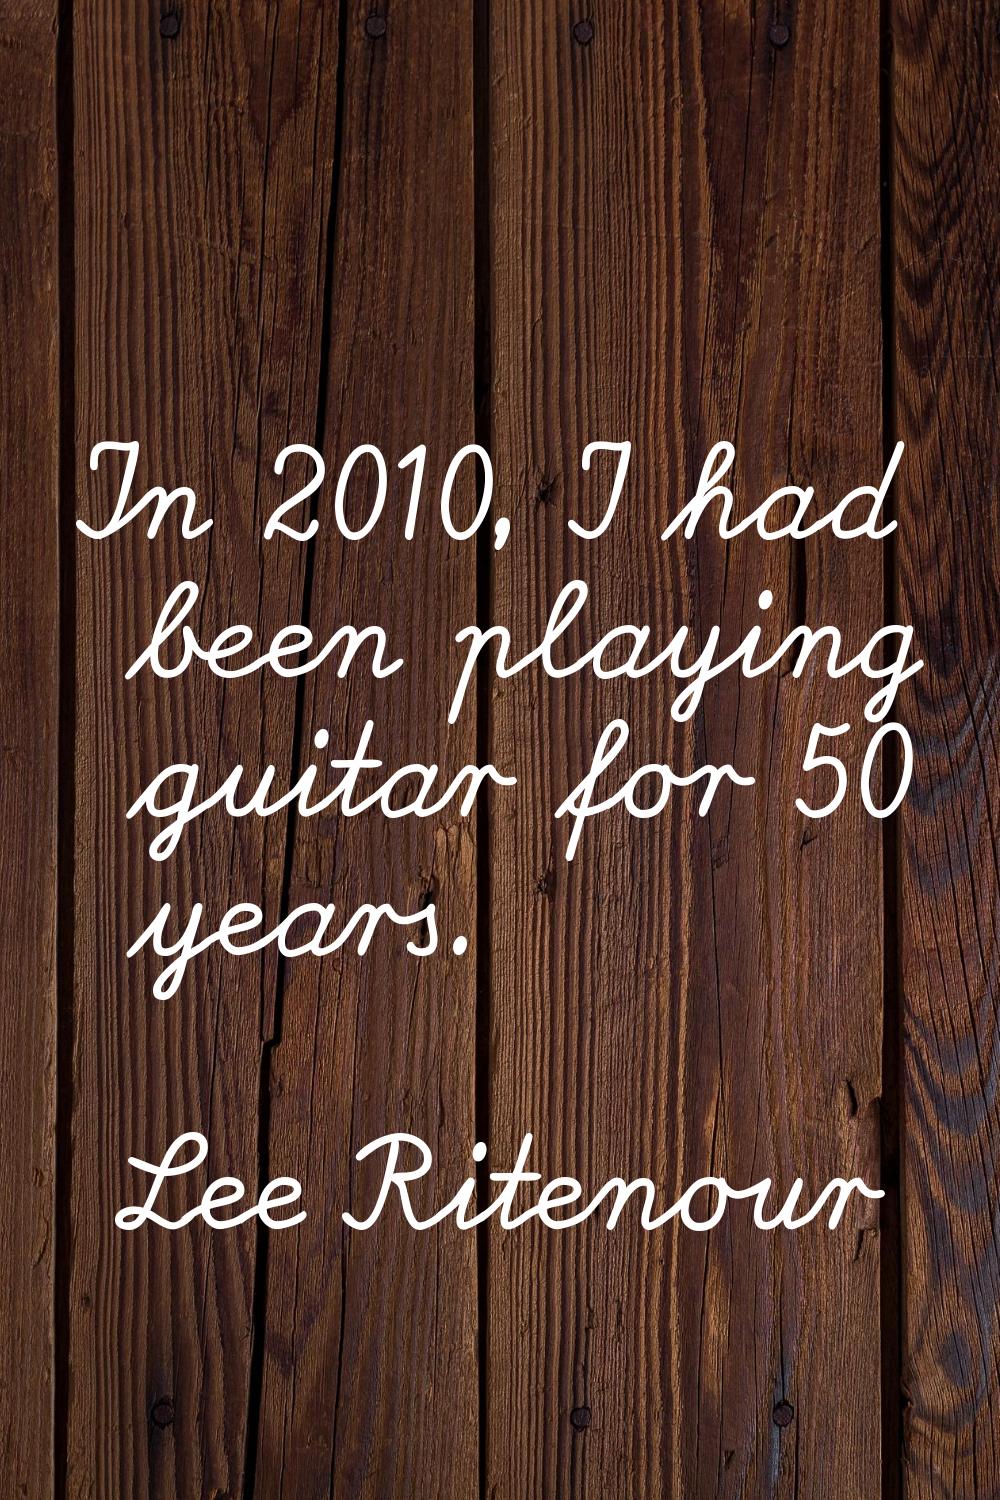 In 2010, I had been playing guitar for 50 years.